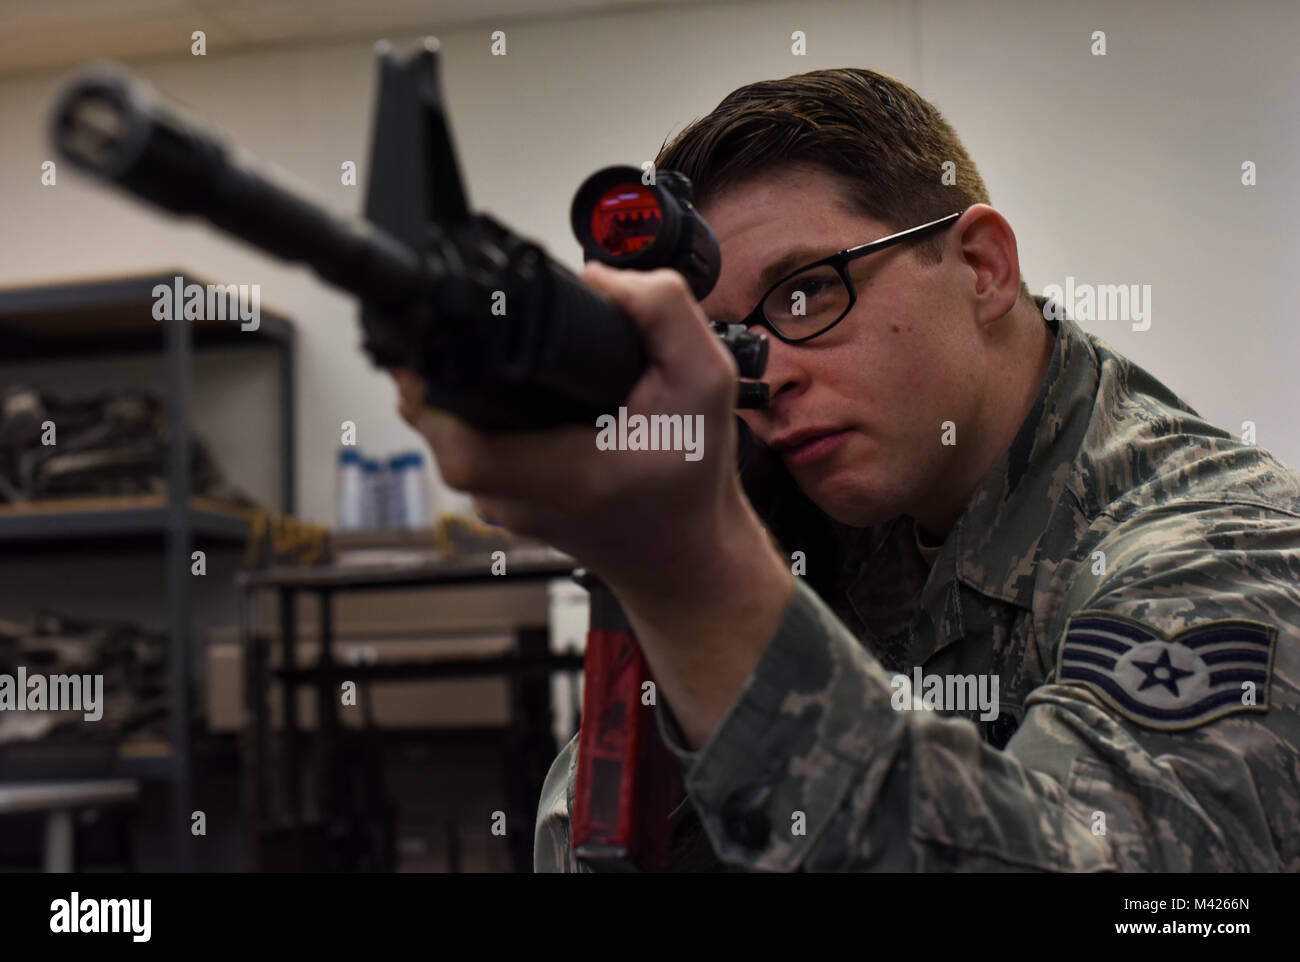 Staff Sgt. John A. Lucic, 62nd Maintenance Squadron unit training manager, looks through the scope of an M-4 carbine during the 627th Security Forces Squadron’s Combat Arms Training and Maintenance class at Joint Base Lewis-McChord, Wash., Jan. 31, 2018. The course consisted of a classroom portion followed by shooting at a range to qualify. (U.S. Air Force photo by Senior Airman Tryphena Mayhugh) Stock Photo